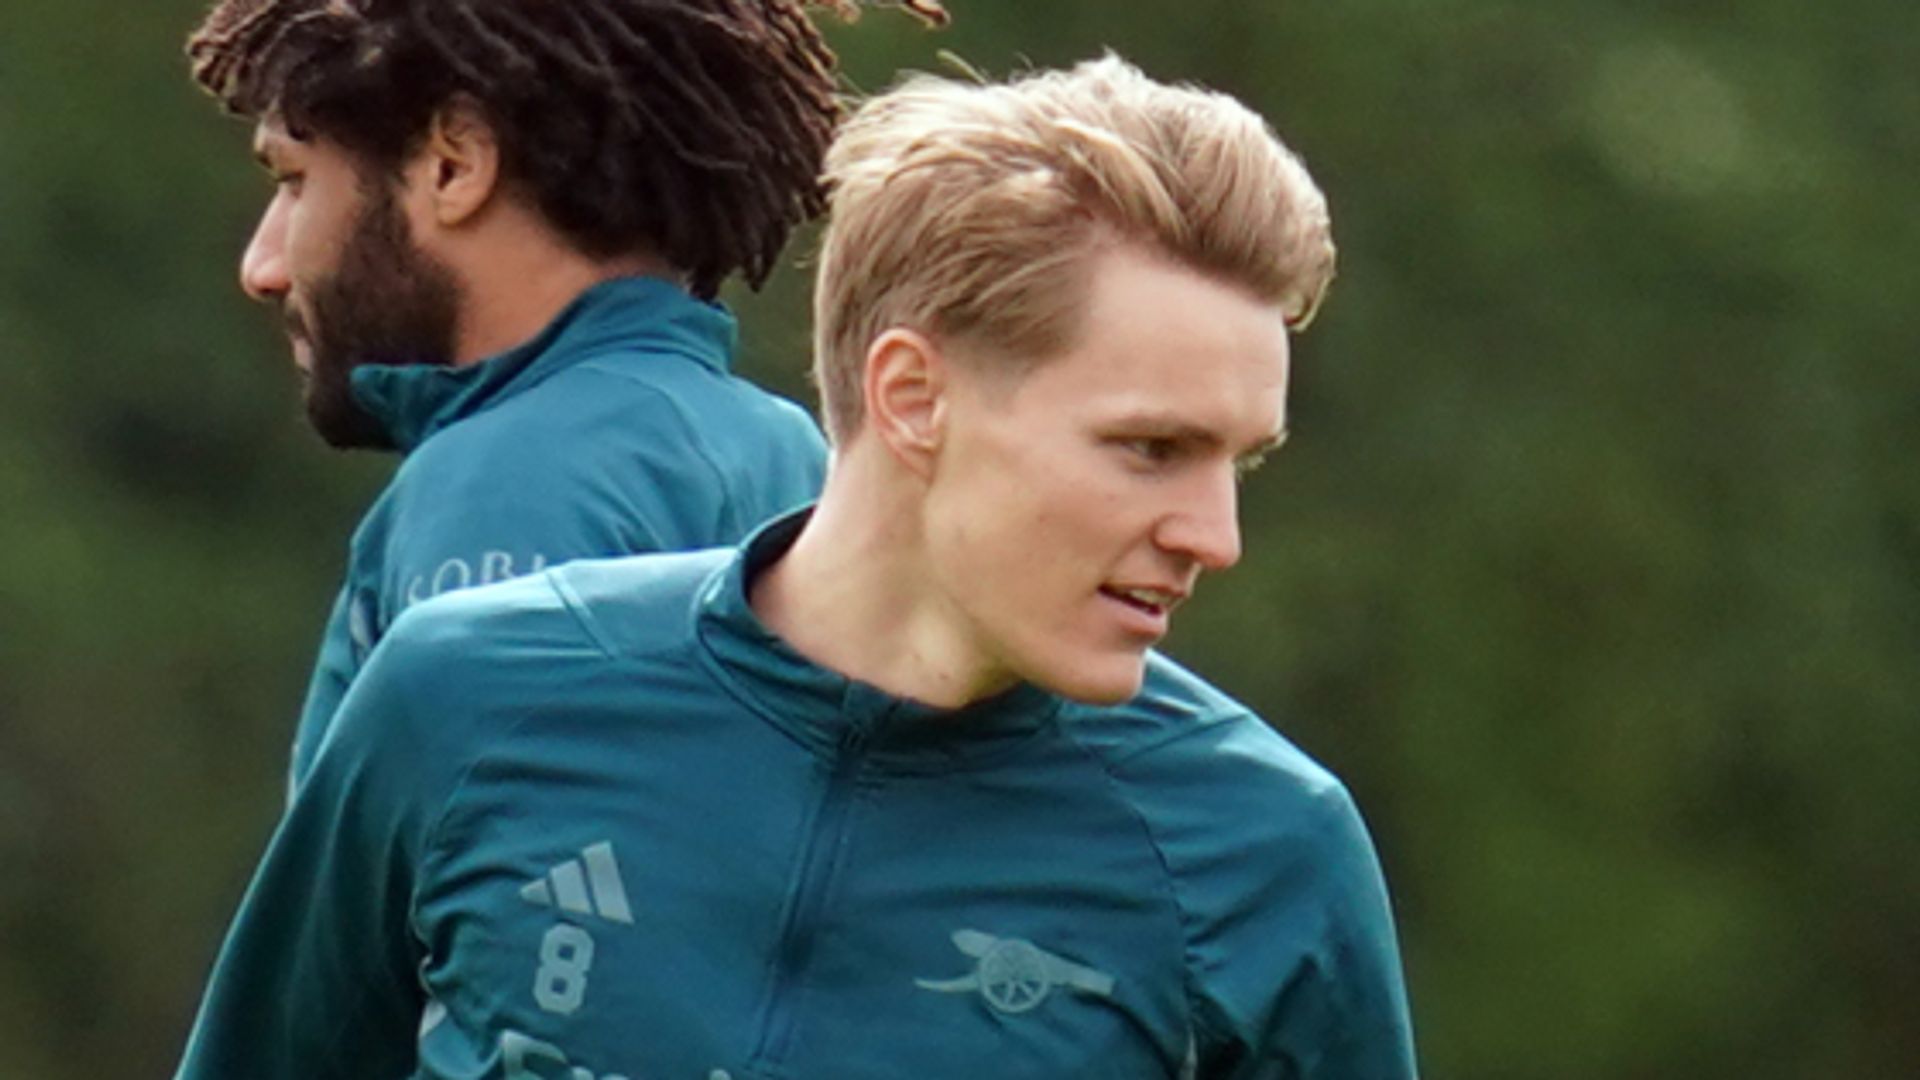 Bayern Munich vs Arsenal preview: Odegaard trains to ease injury fears